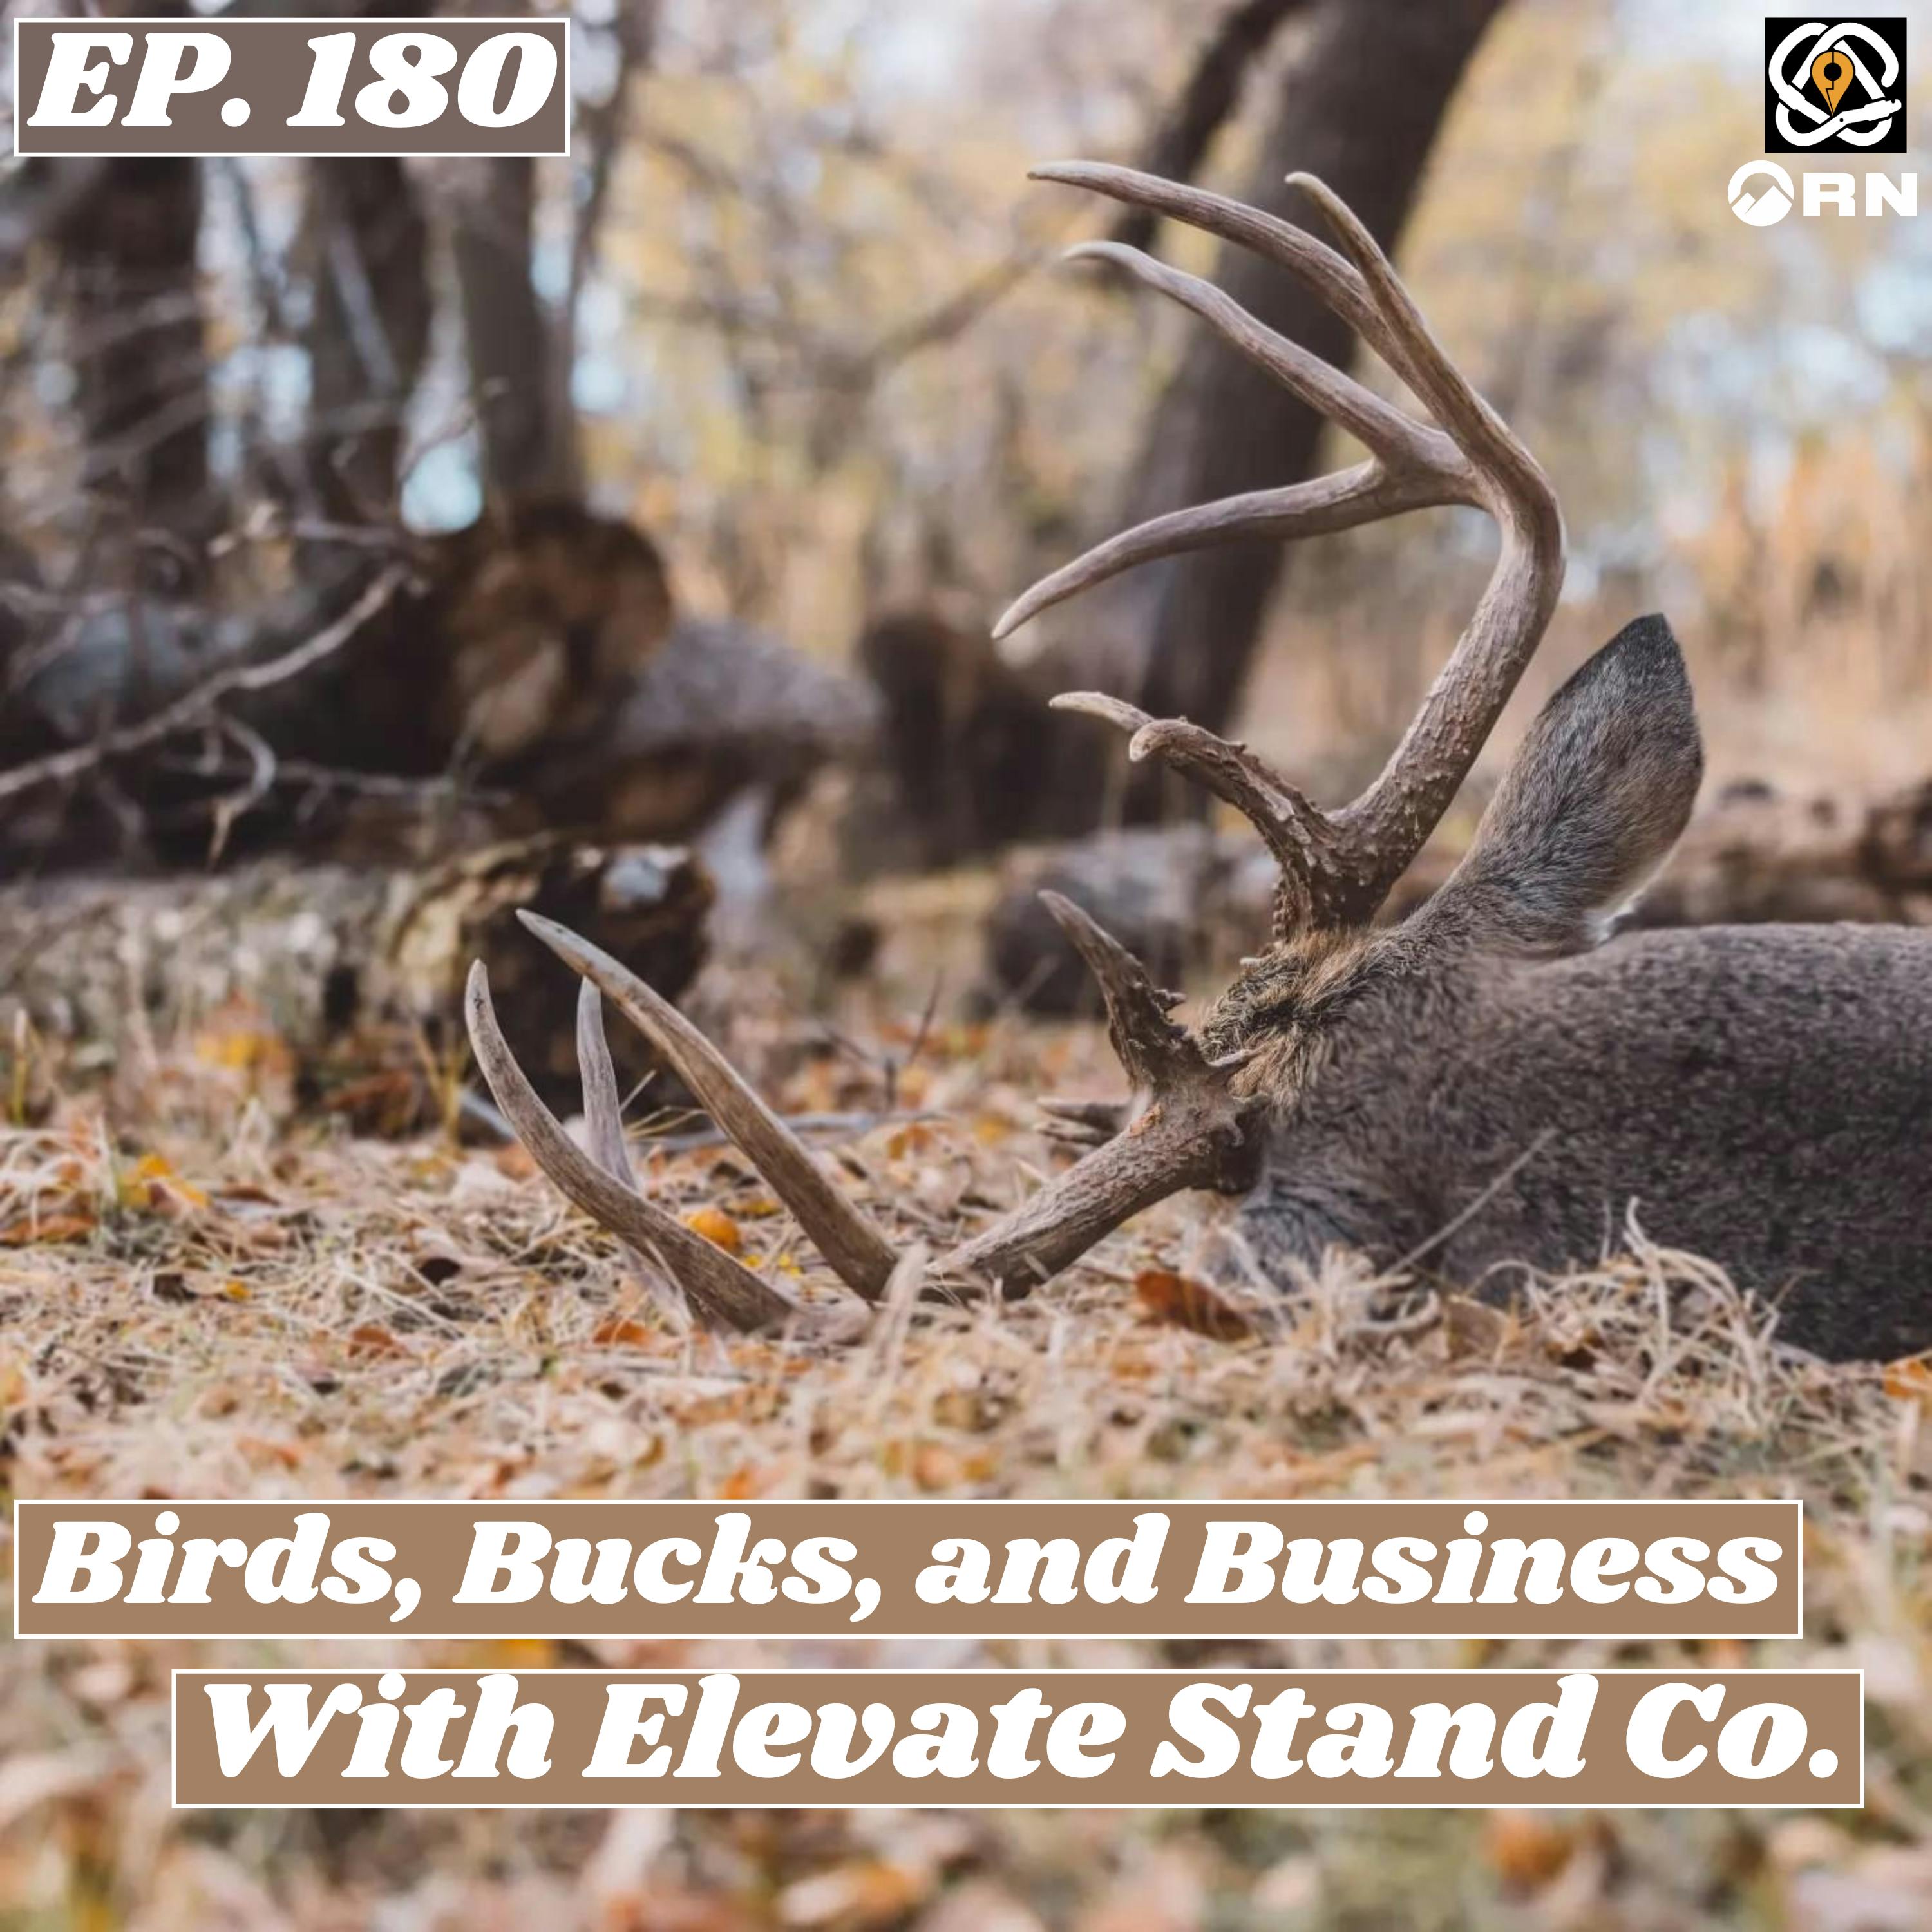 Birds, Bucks, and Business with Elevate Stand Co.